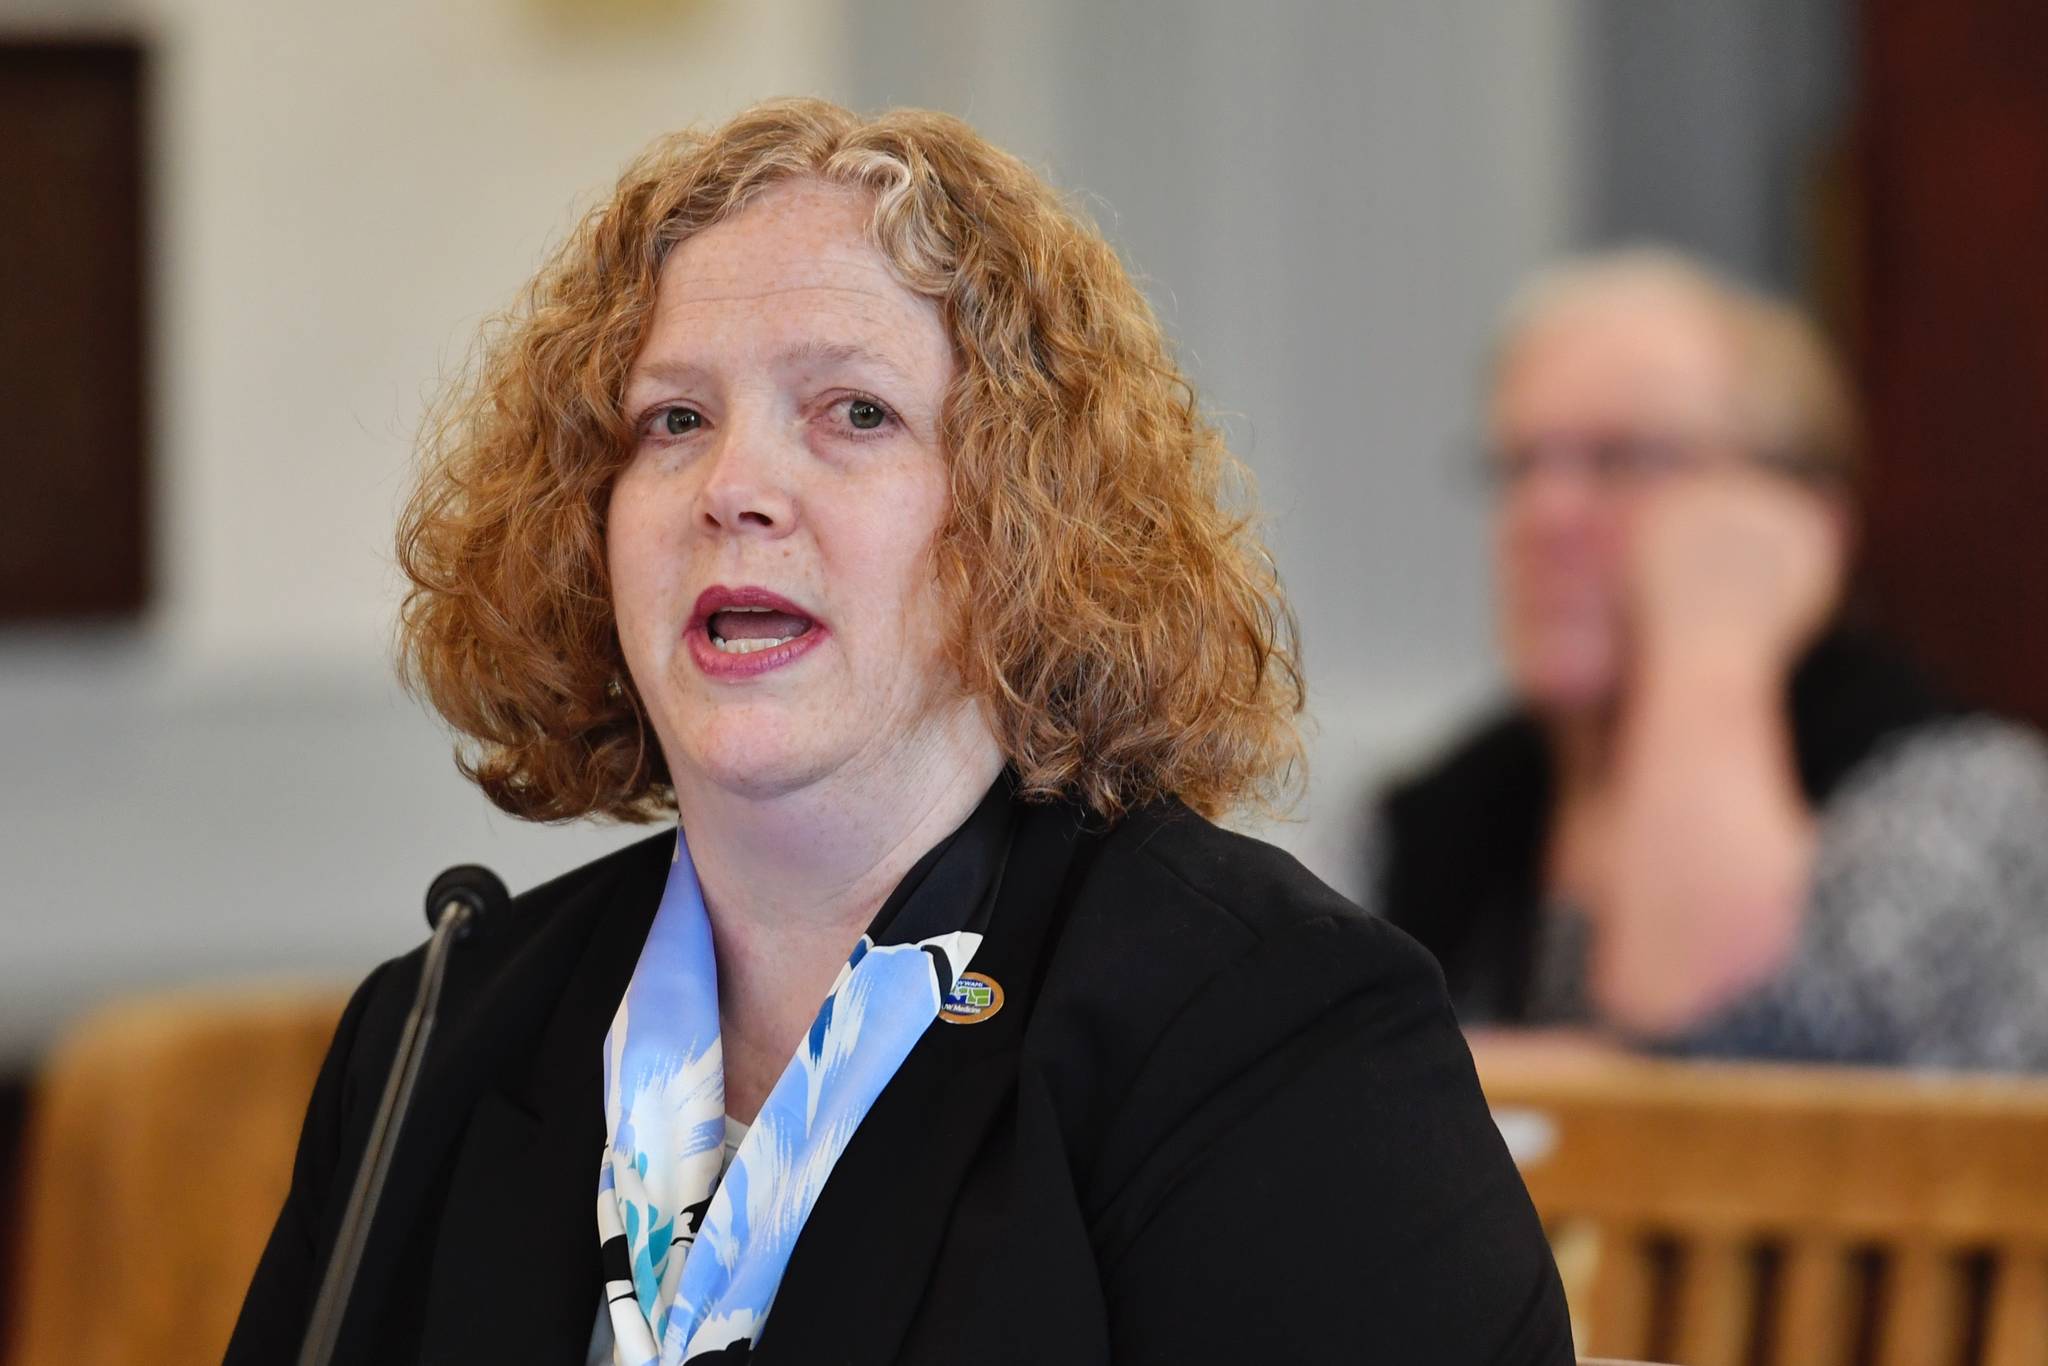 Dr. Suzanne Allen, from Boise, Idaho, gives an overview of the WWAMI School of Medical Education program to the Senate Finance Committee at the Capitol on Monday, March 25, 2019. (Michael Penn | Juneau Empire)